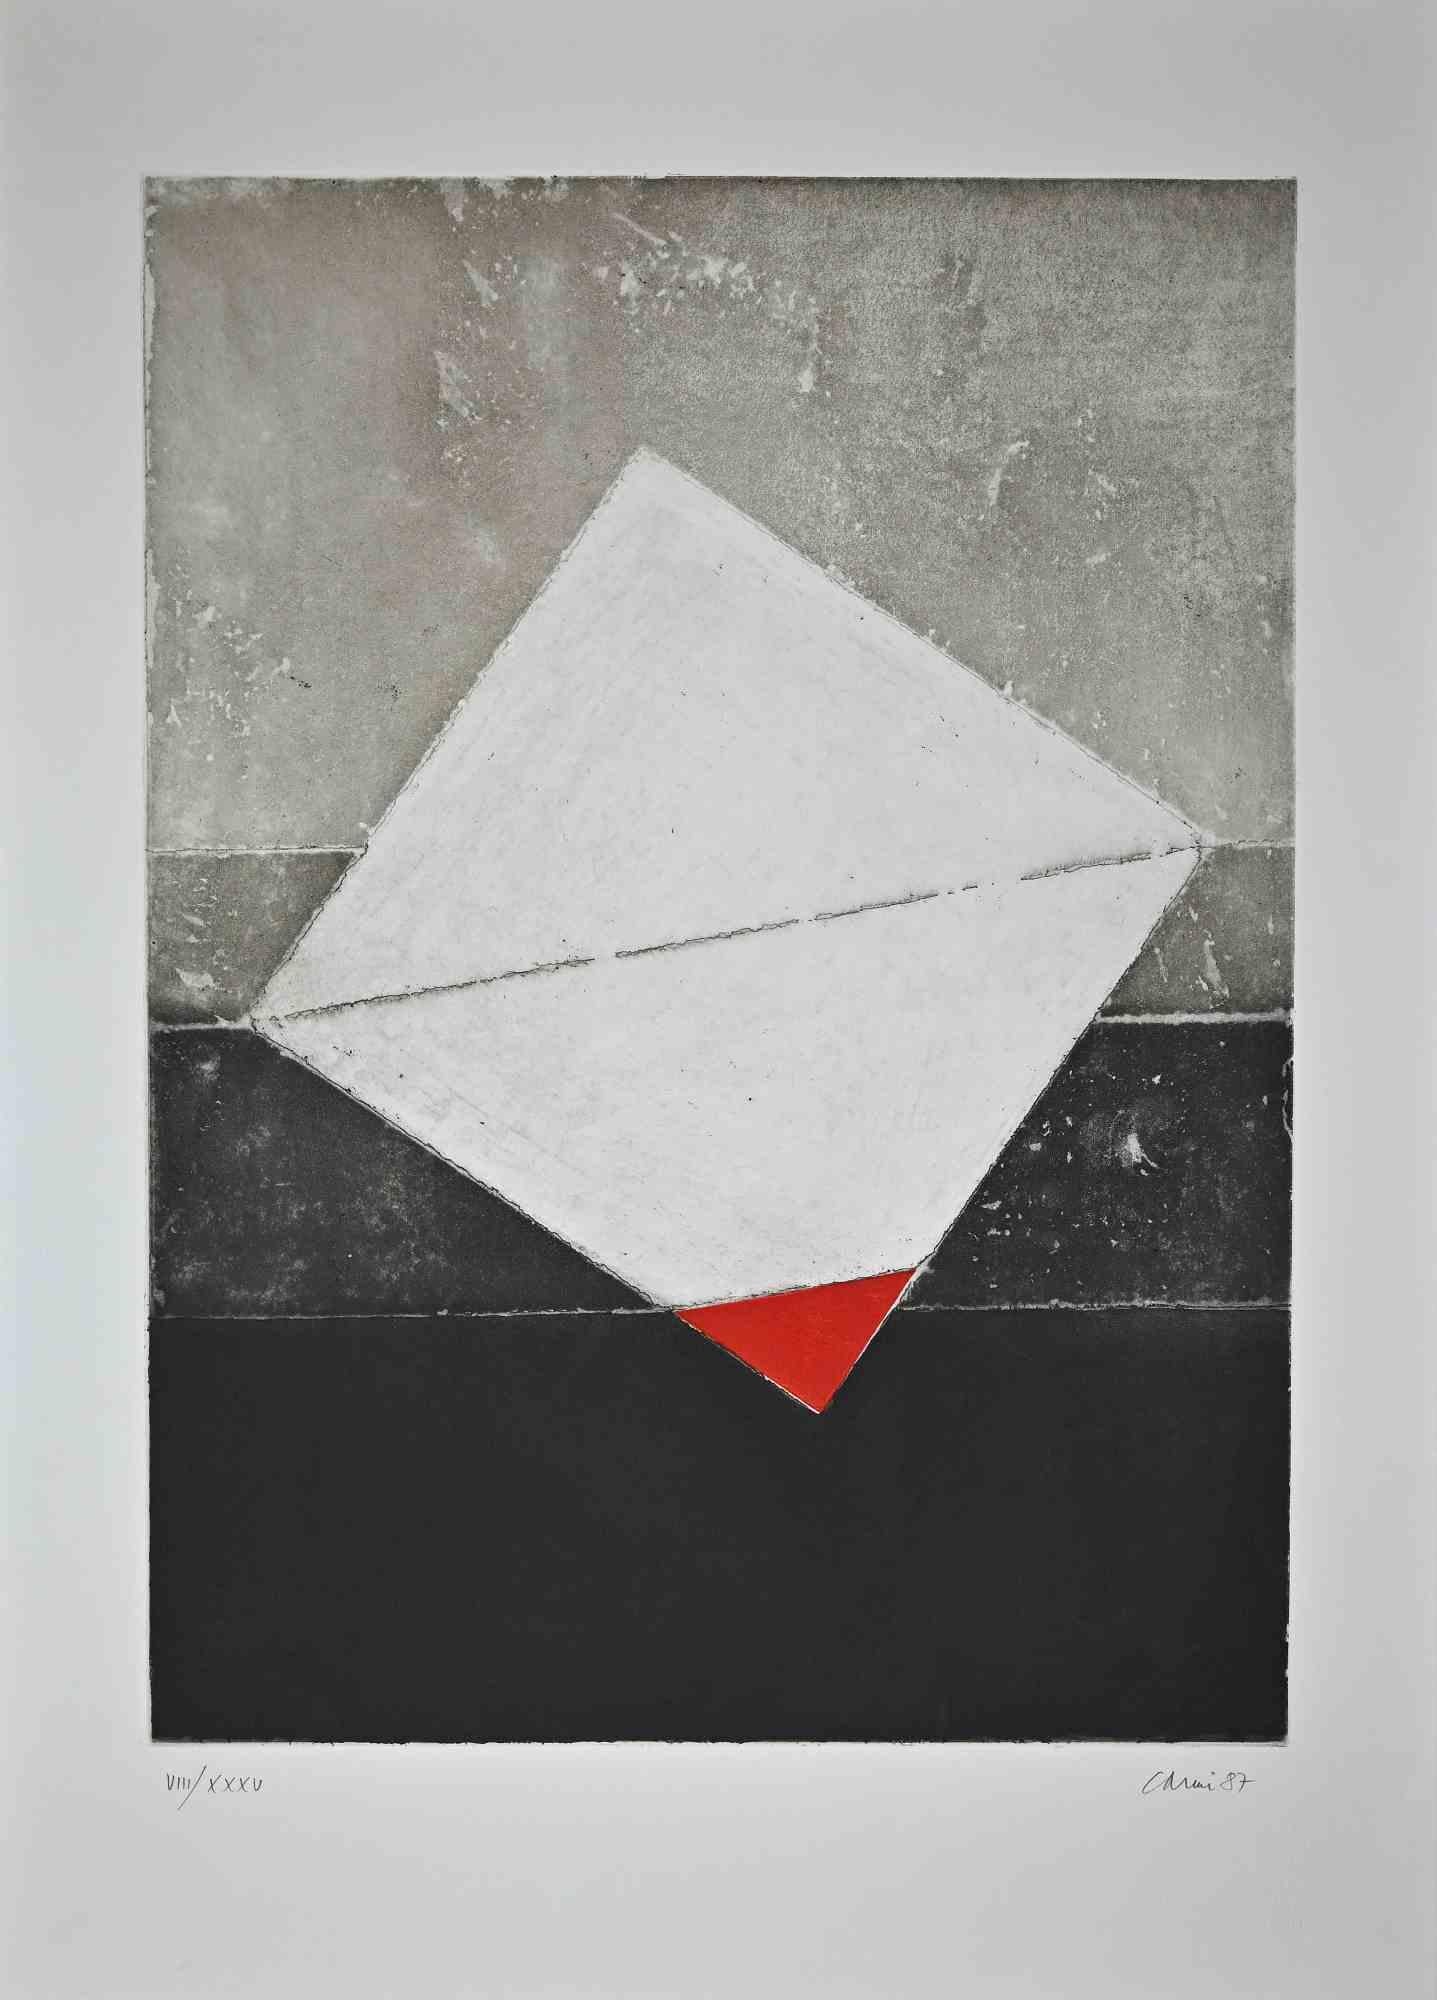 Abstract Composition is an original etching realized in the 1960s by Eugenio Carmi (Genoa, February 17, 1920 - Lugano, February 16, 2016). 

Hand-signed and dated in pencil on the lower right corner: Carmi '83. 

Numbered in pencil on the lower left